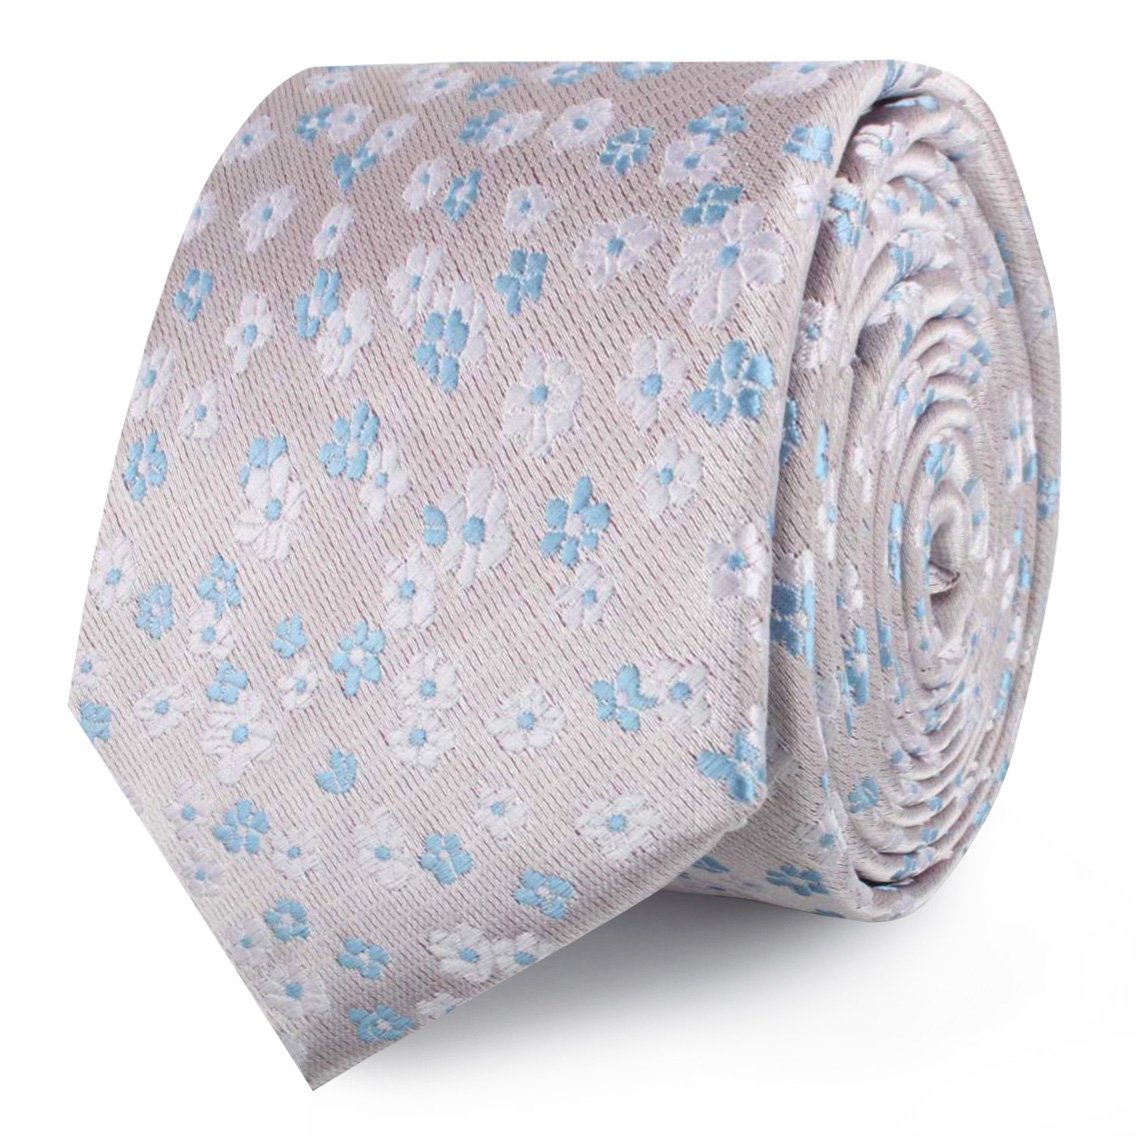 Miharashi Seaside Blue and White Floral Skinny Ties